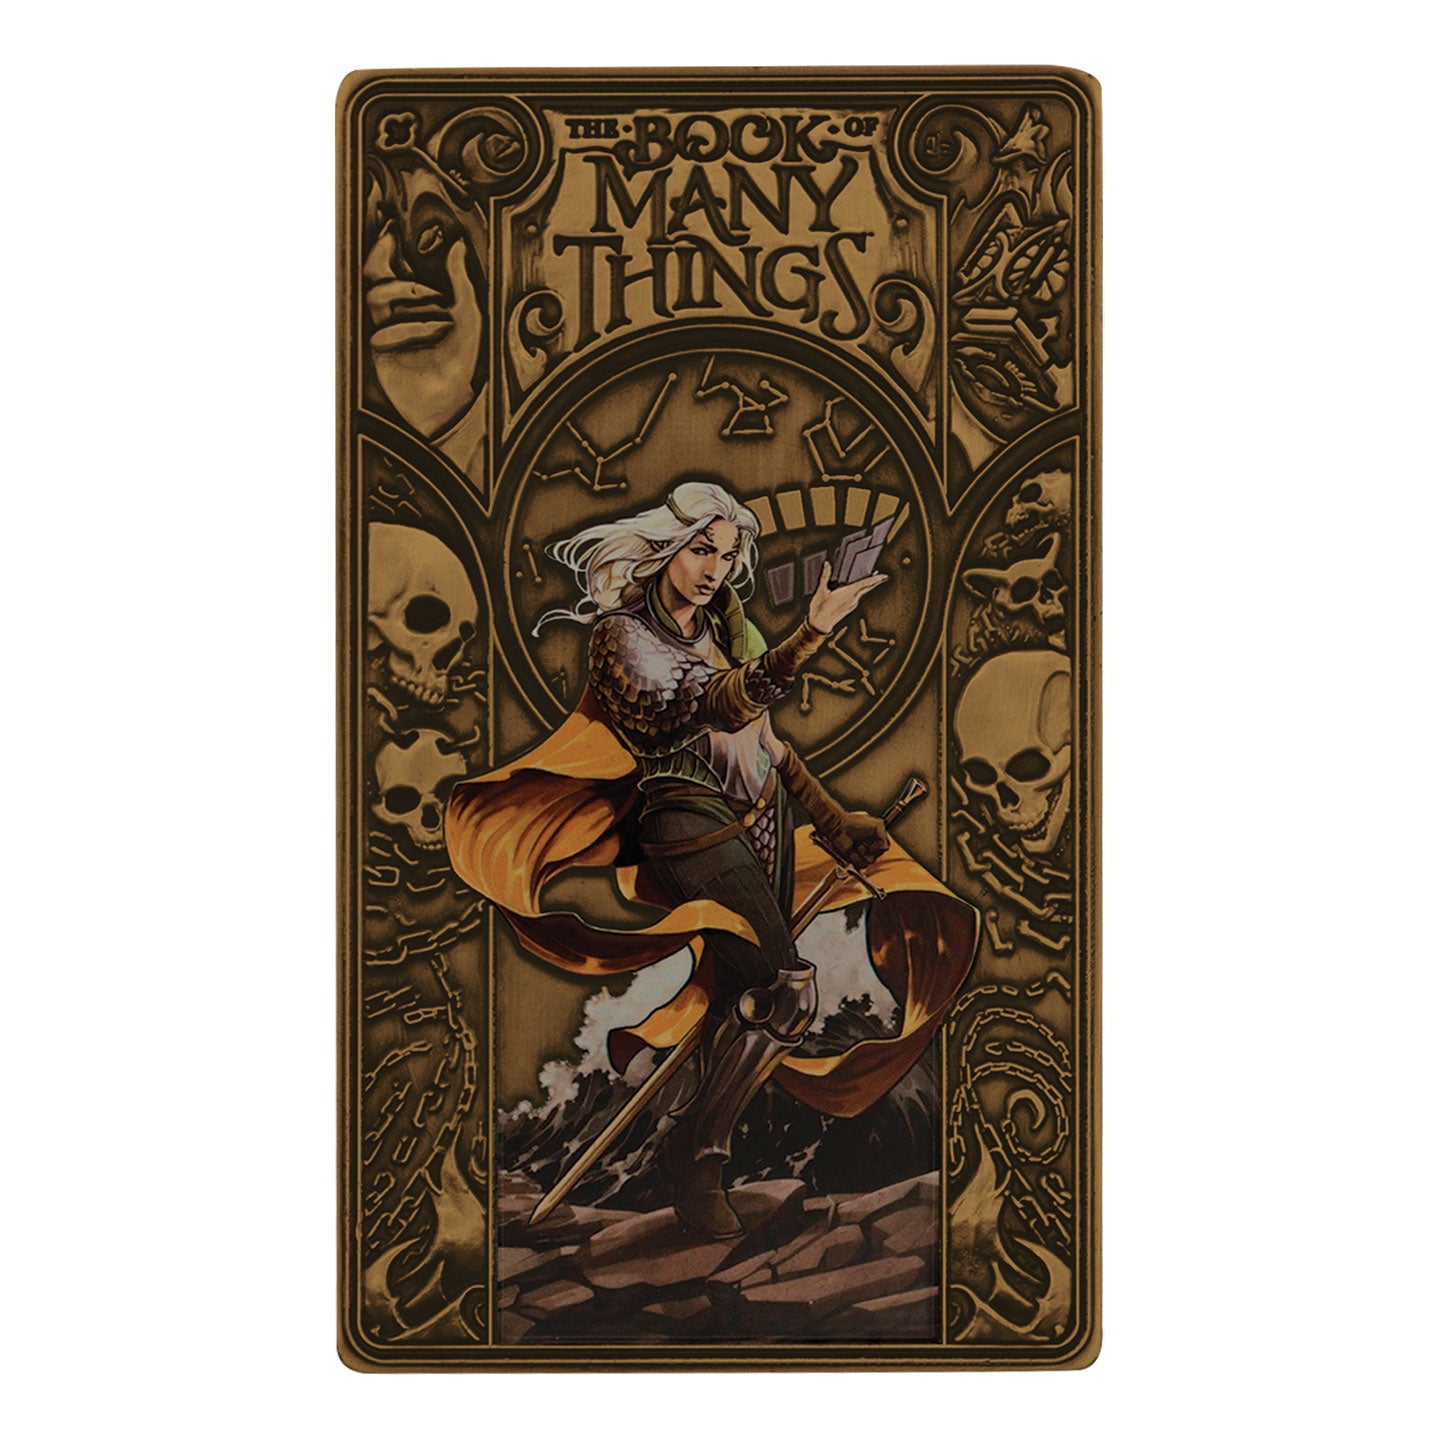 Dungeons & Dragons Book of Many Things Limited Edition Ingot